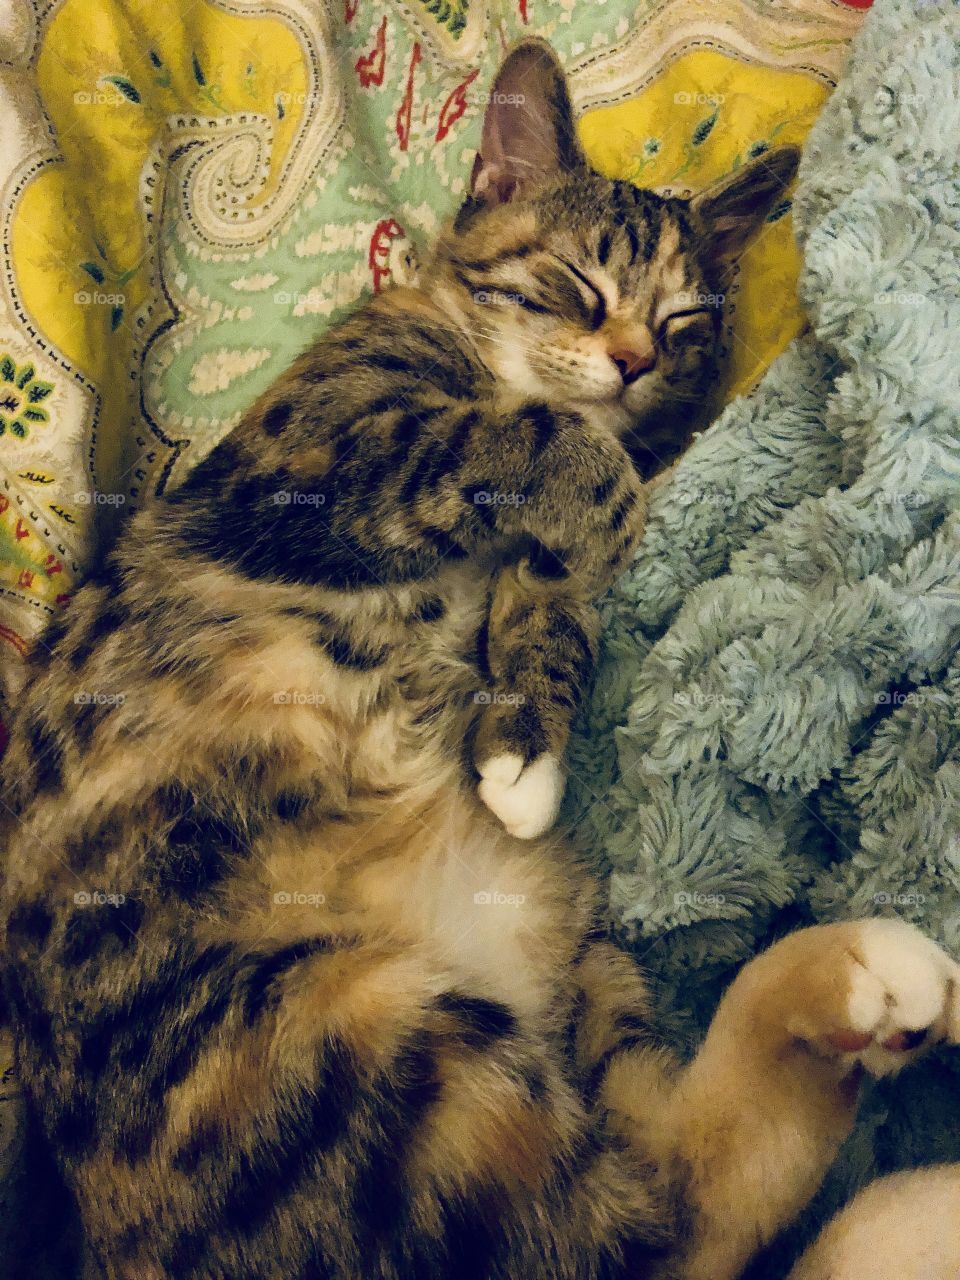 Sleeping tabby kitten showing her belly on an aqua colored blanket and colorful comforter